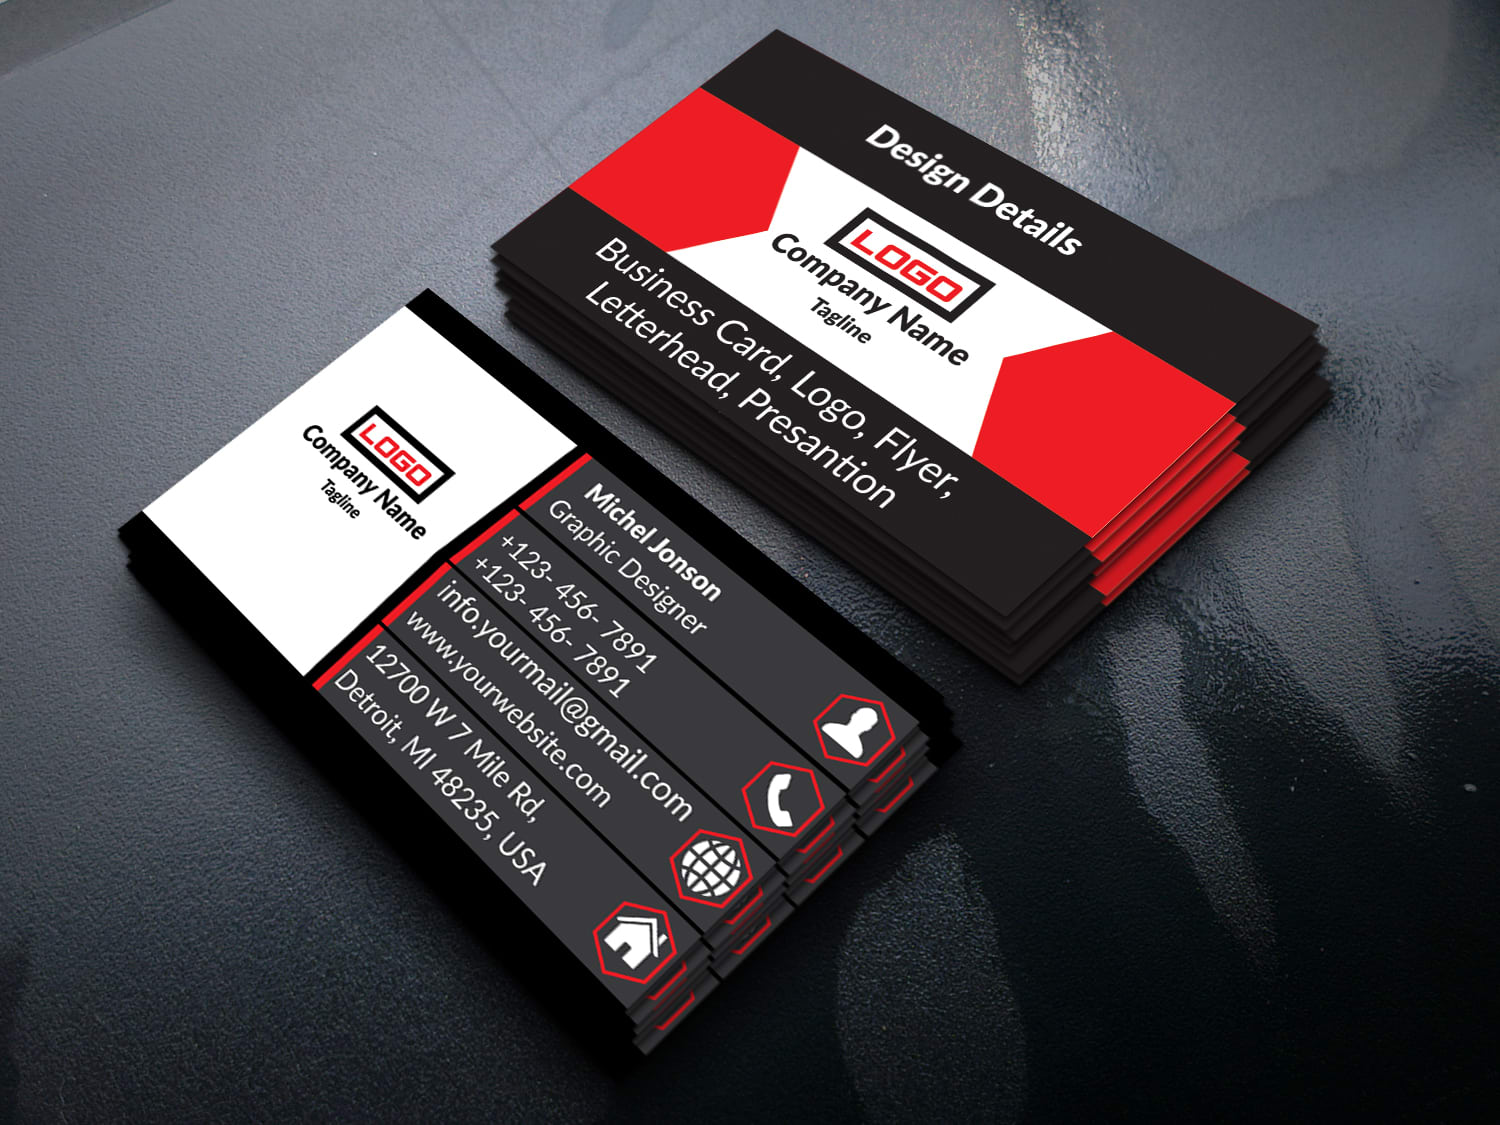 I can Business card design very unique and clearly. I have 1 year experiences.